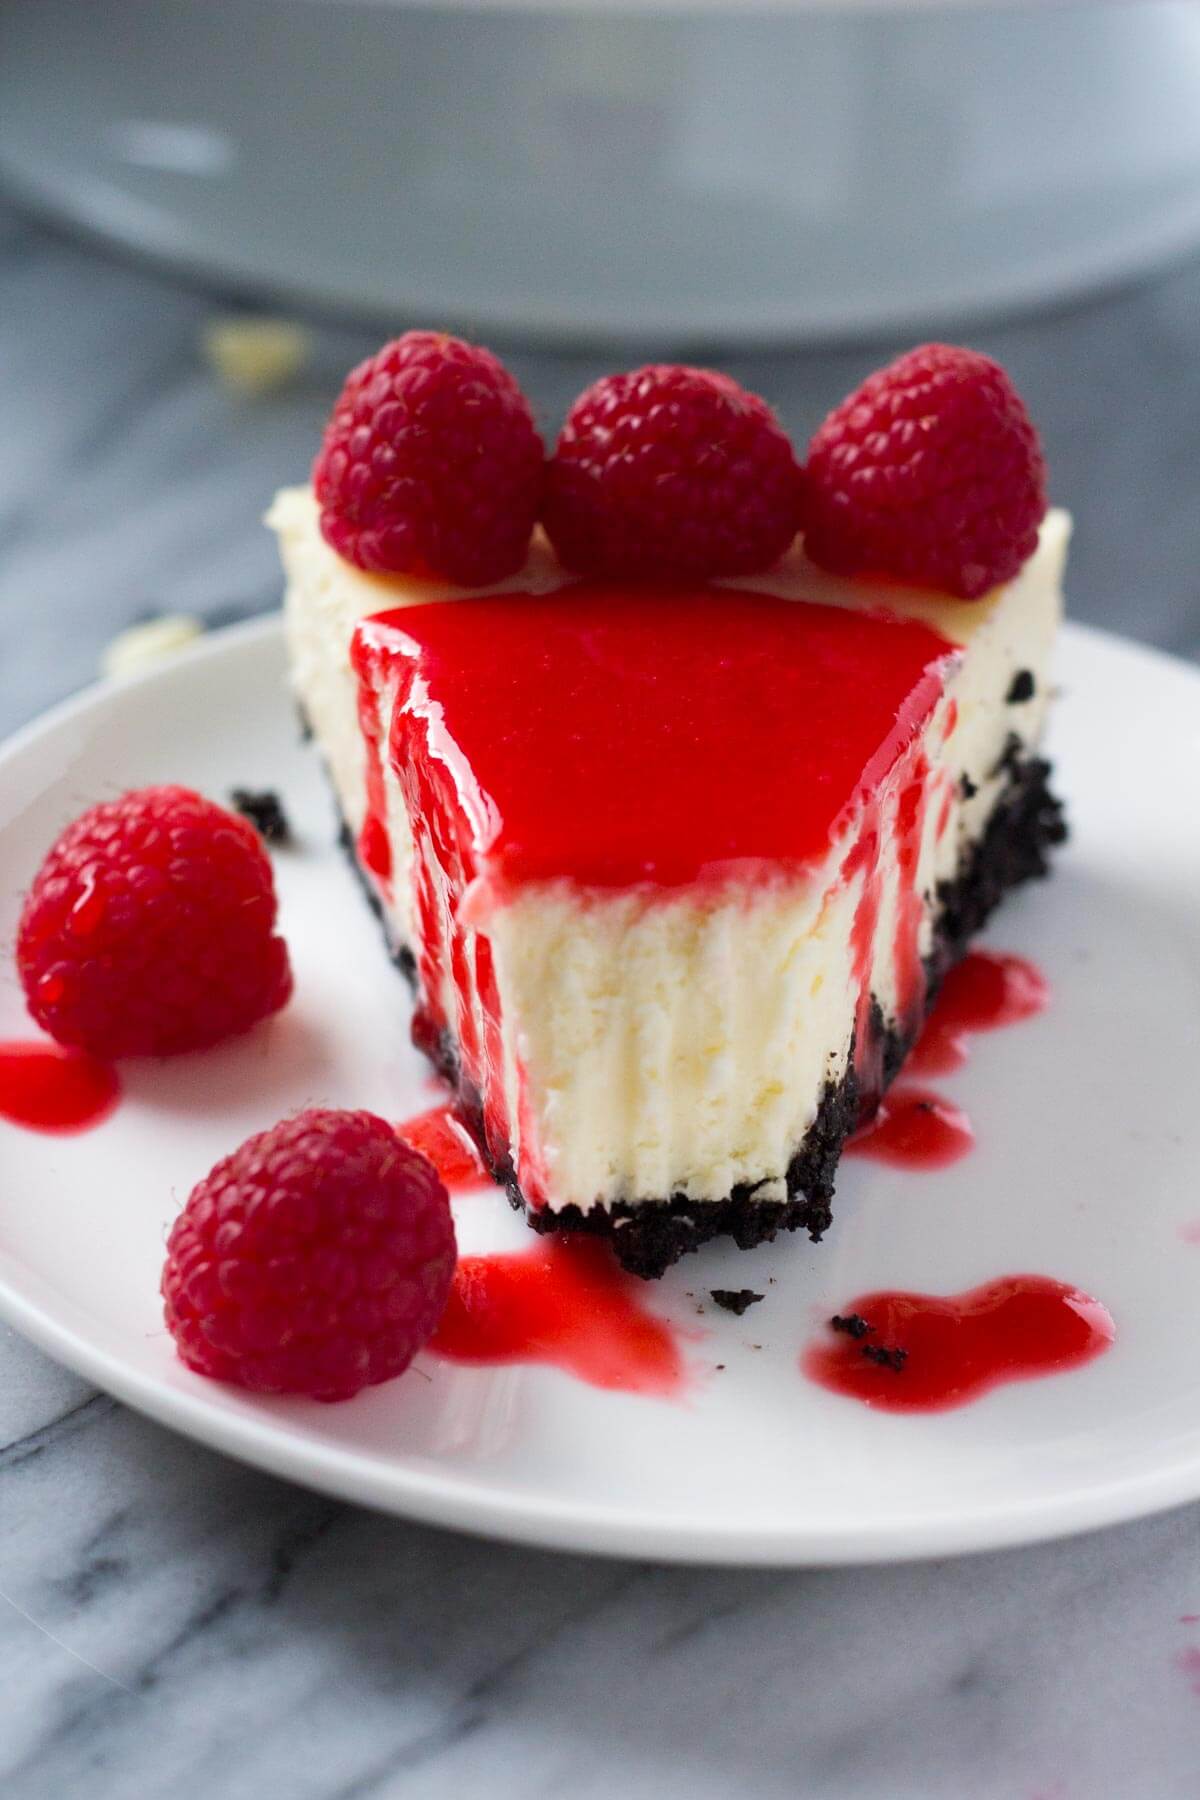 Smooth, creamy White Chocolate Cheesecake with an Oreo cookie crust and Raspberry Coulis Sauce. With easy step by step instructions - it's the PERFECT cheesecake every time!